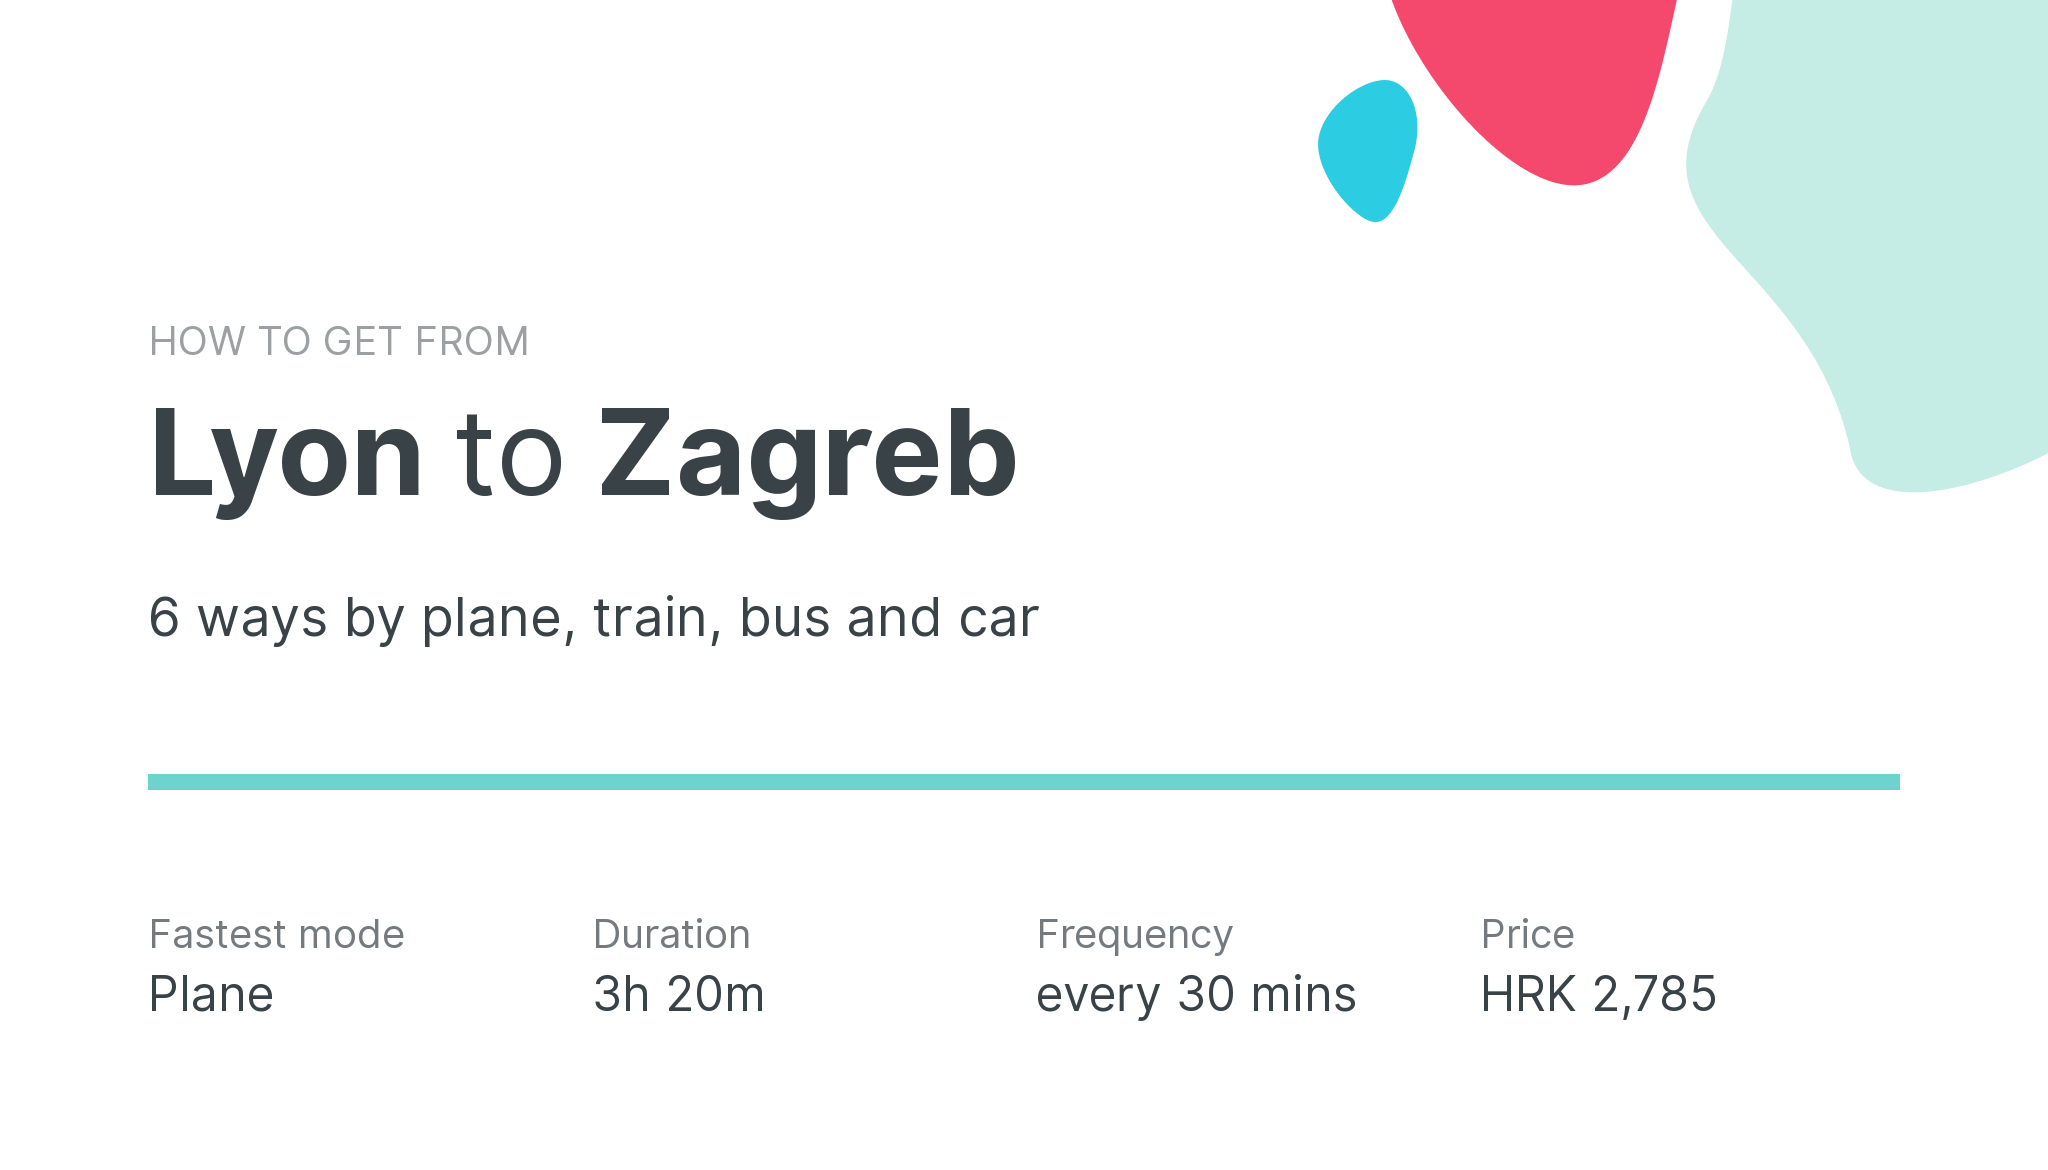 How do I get from Lyon to Zagreb